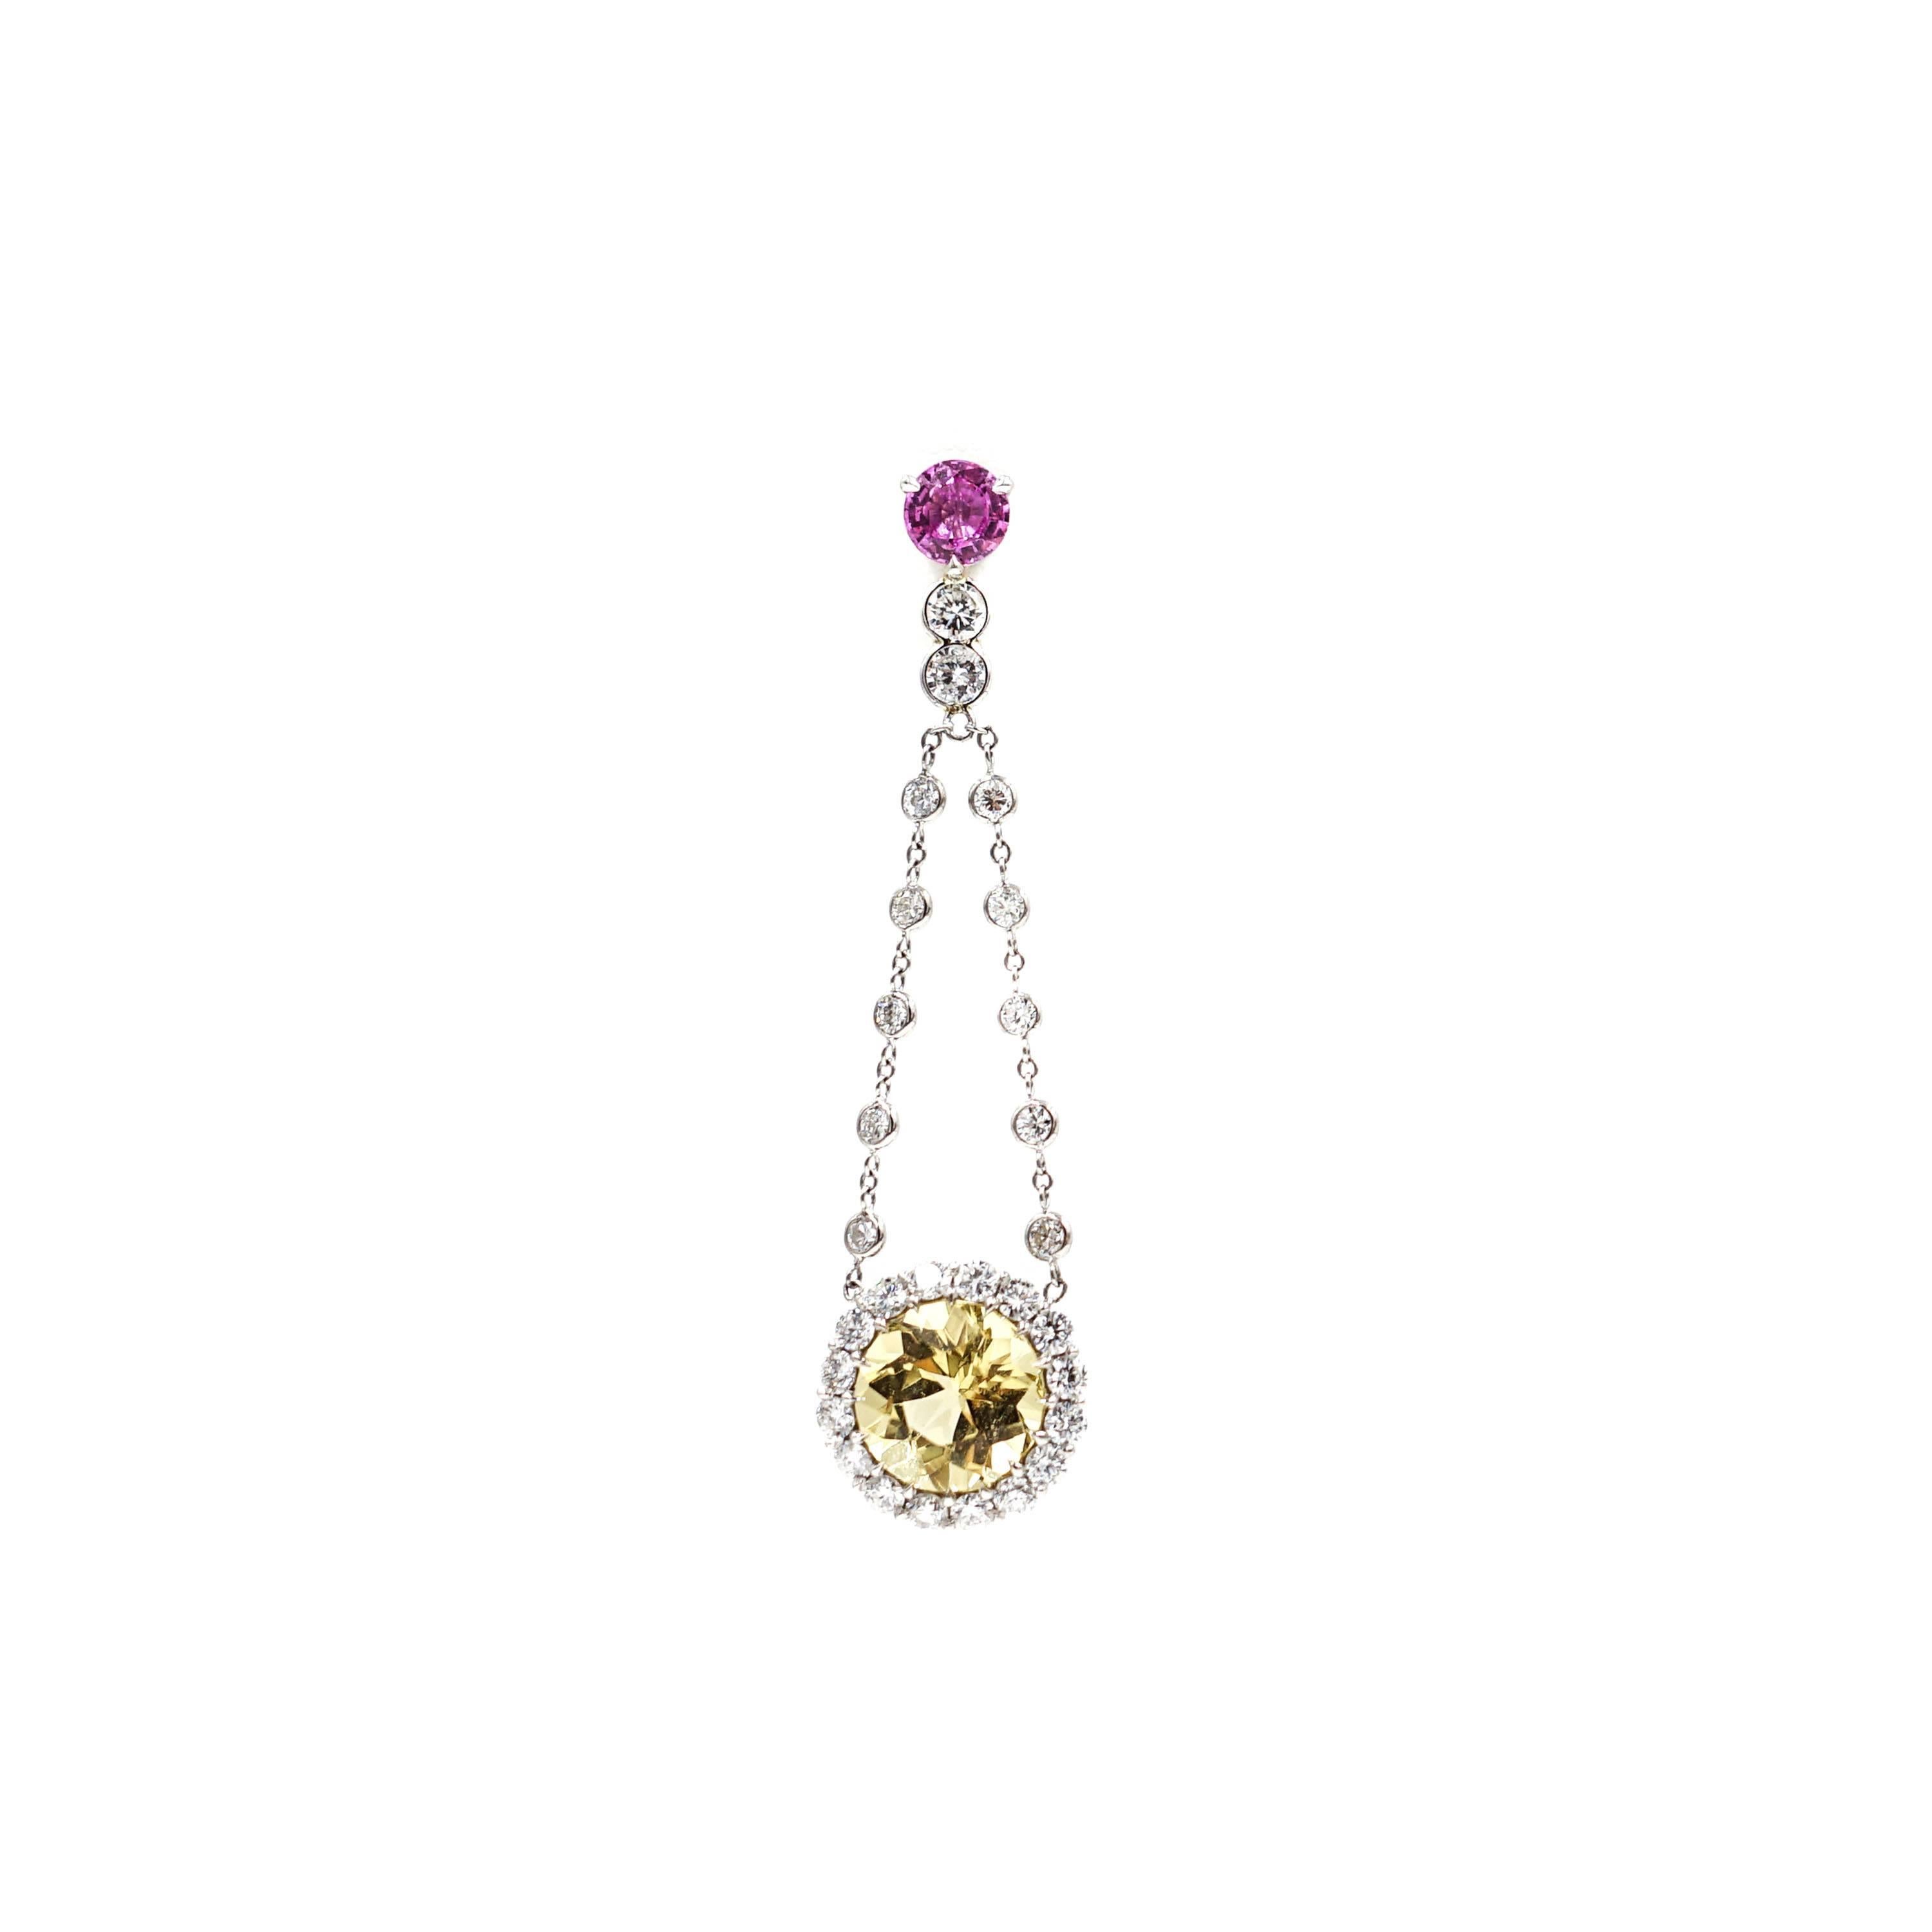 Graceful and feminine... This gorgeous pair of earrings is designed with Diamonds, Pink Sapphires and Yellow Beryl, combinined to create a contrast of colors with a delicate look that can express your personality and taste.
Measures 2 inches in